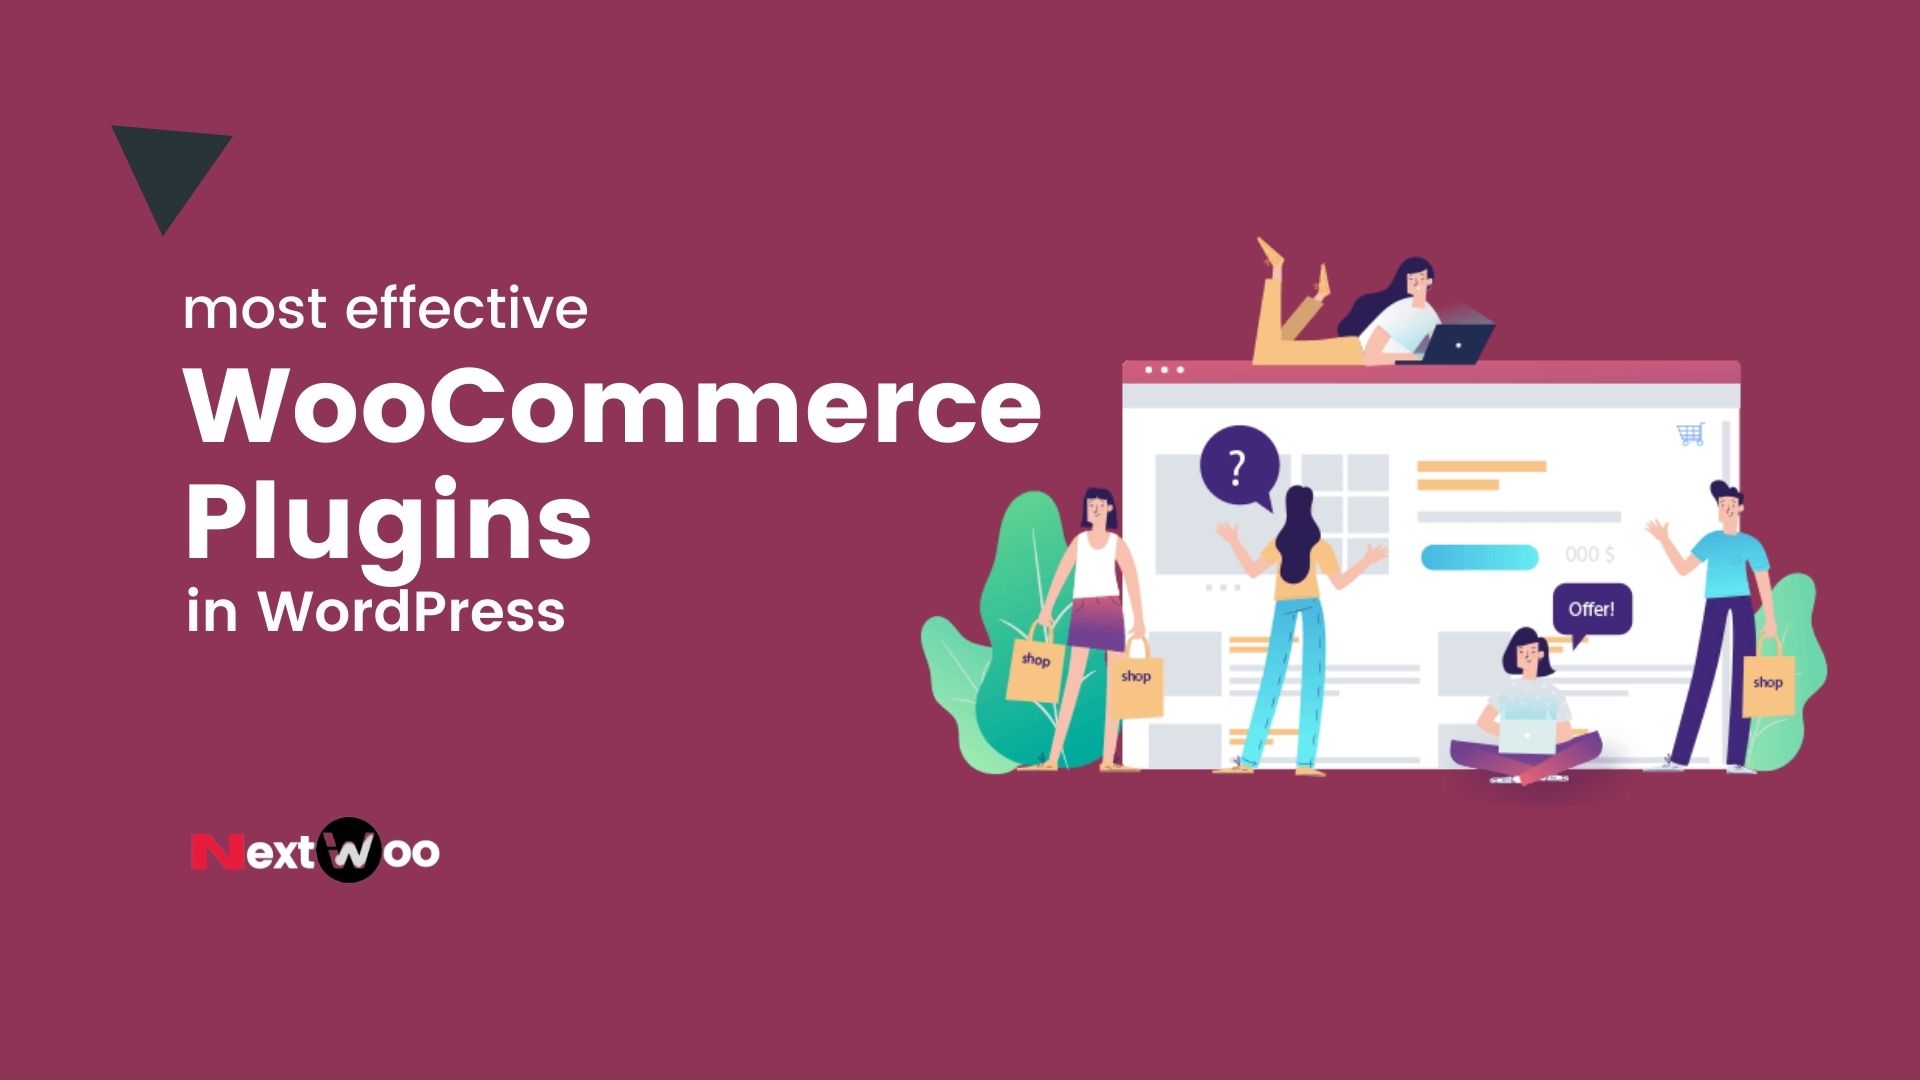 WooCommerce’s most effective plugins